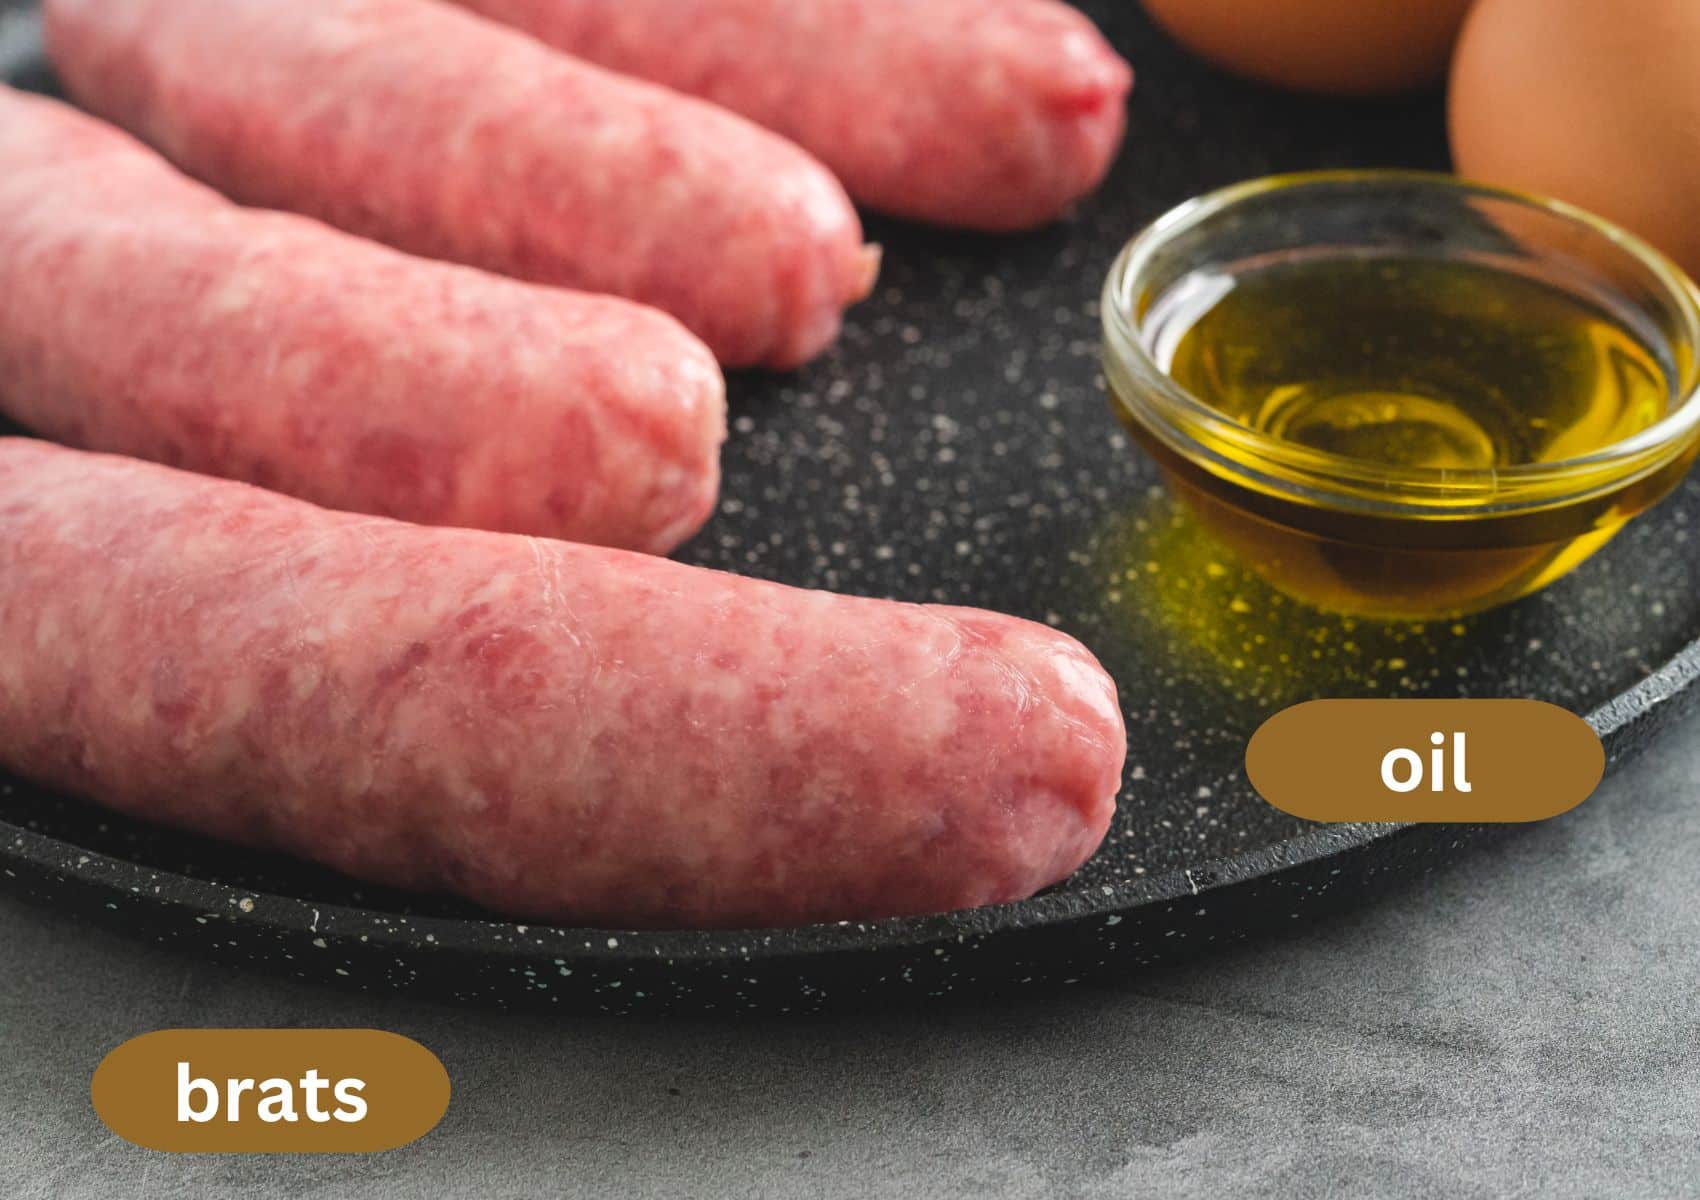 four raw bratwurst sausages and a small bowl of oil on a plate.